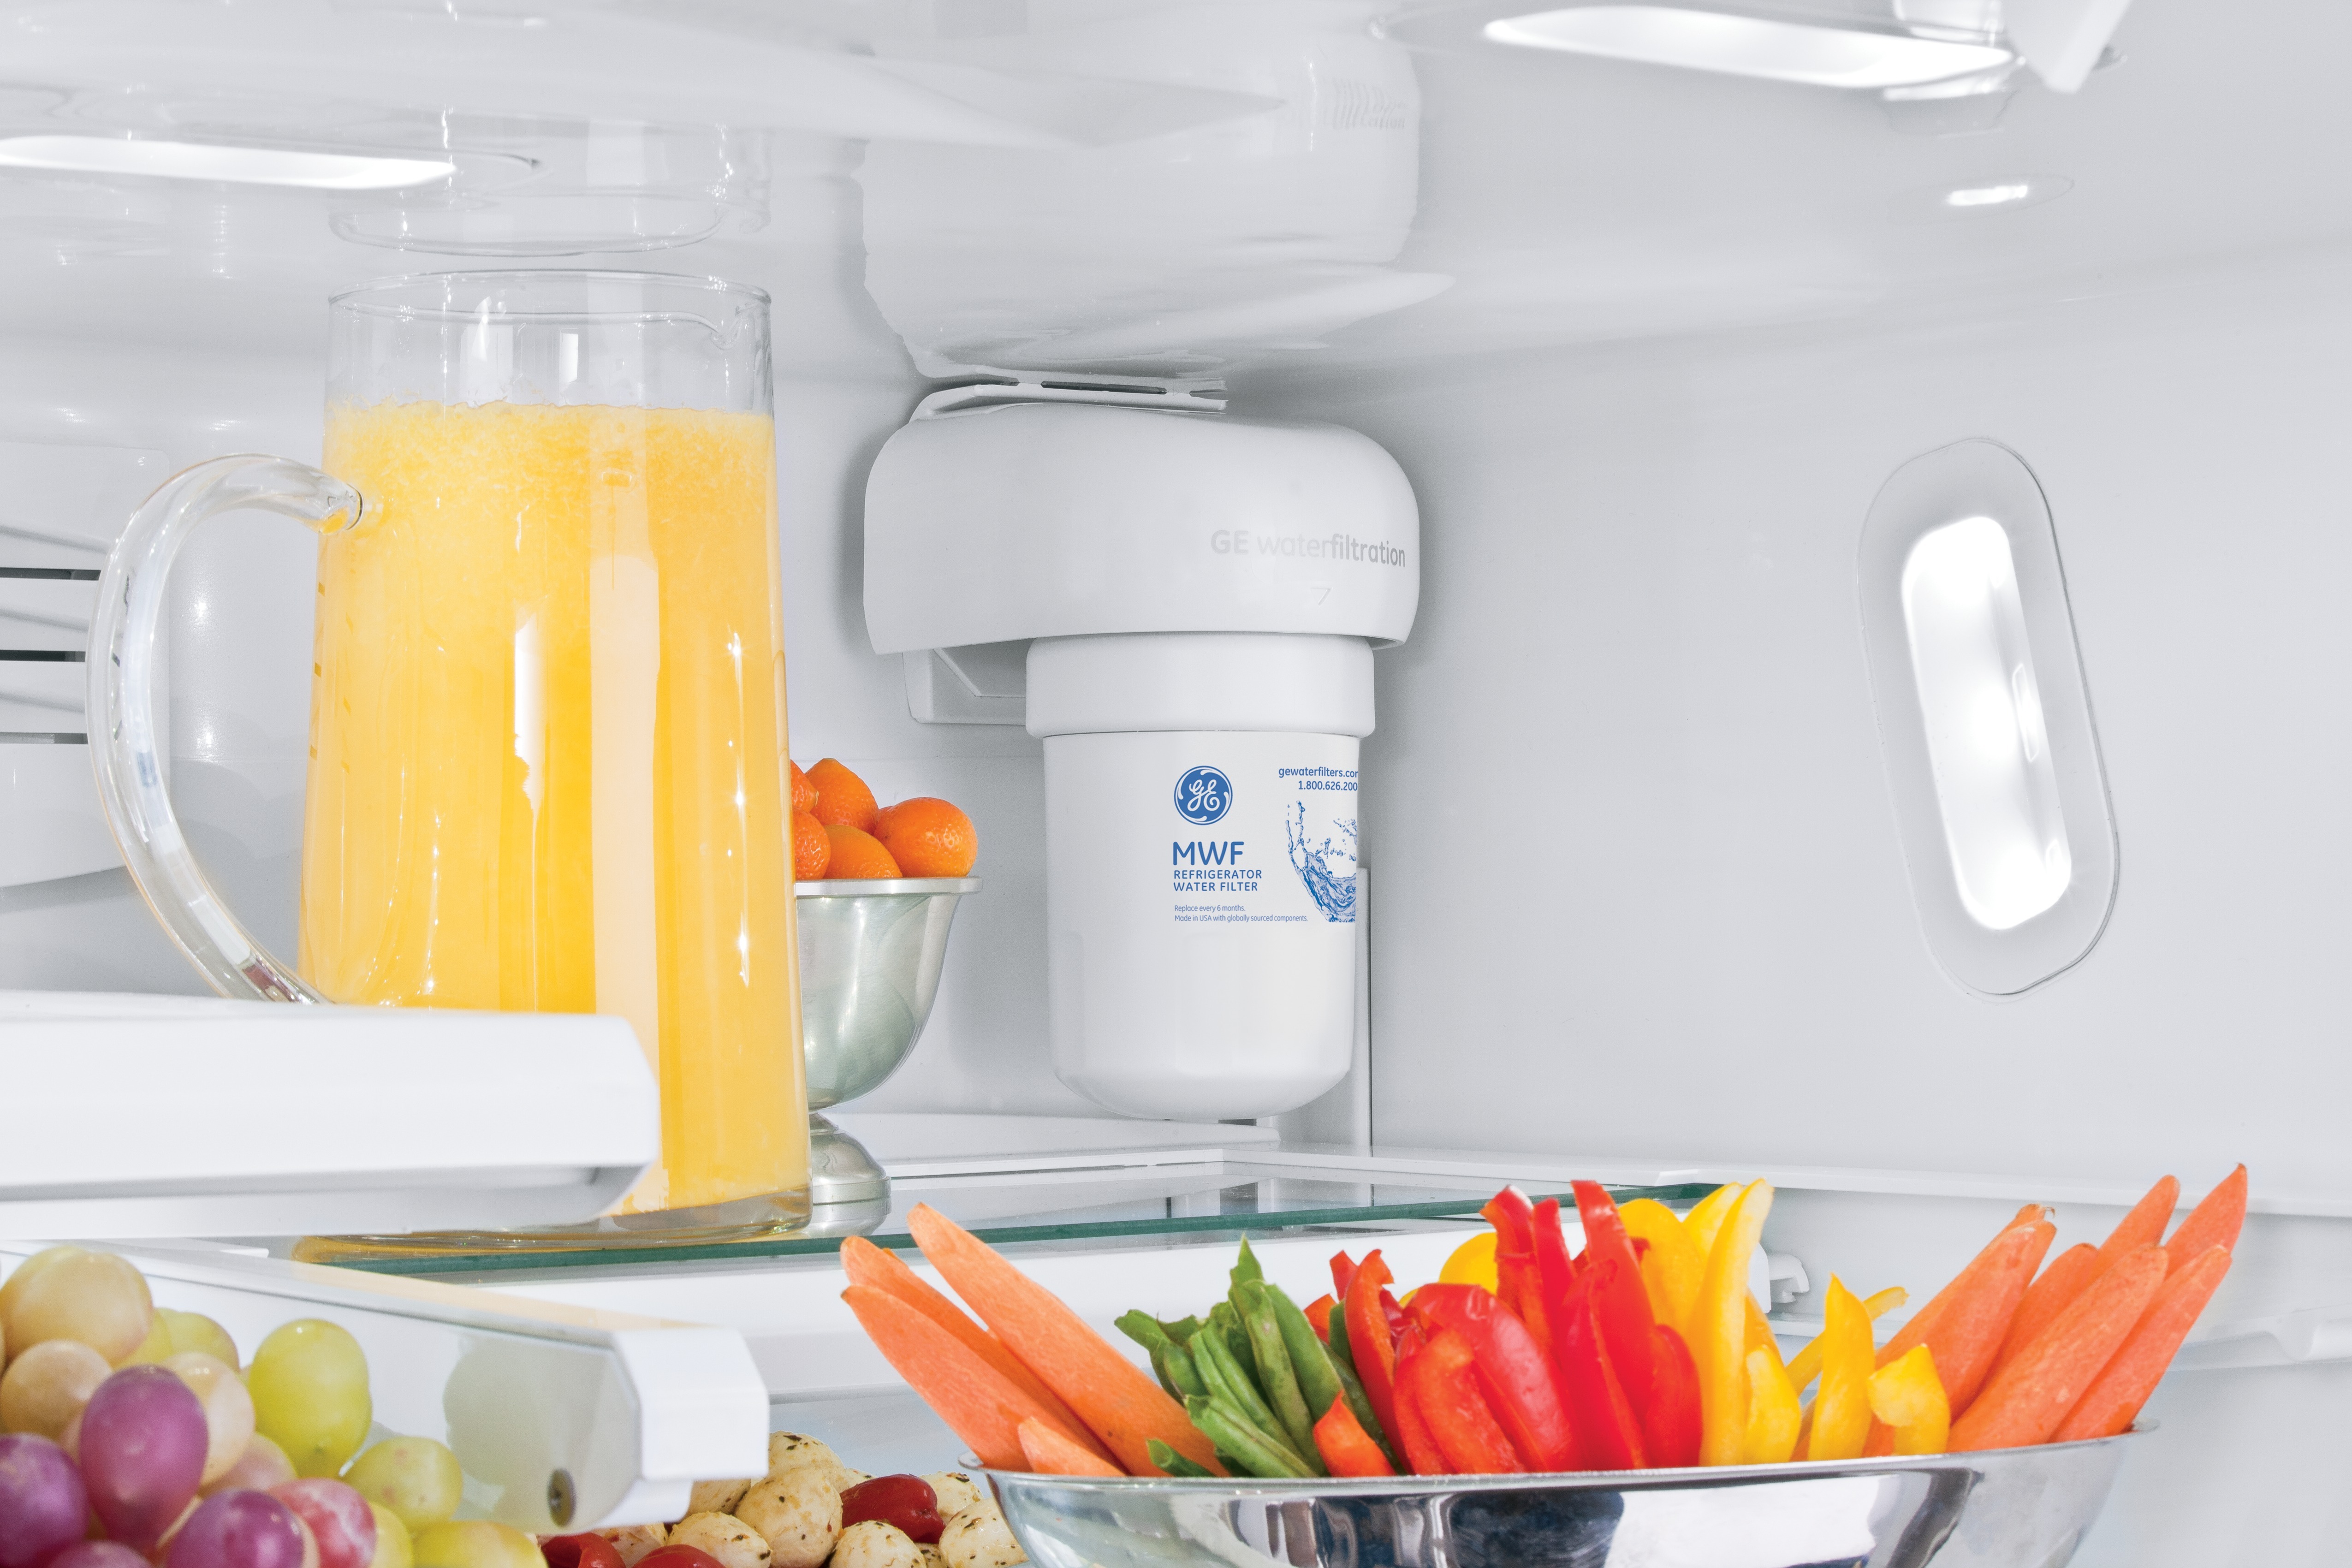 GE’s MWF Water Filter Removes Trace Amounts of 5 Pharmaceuticals